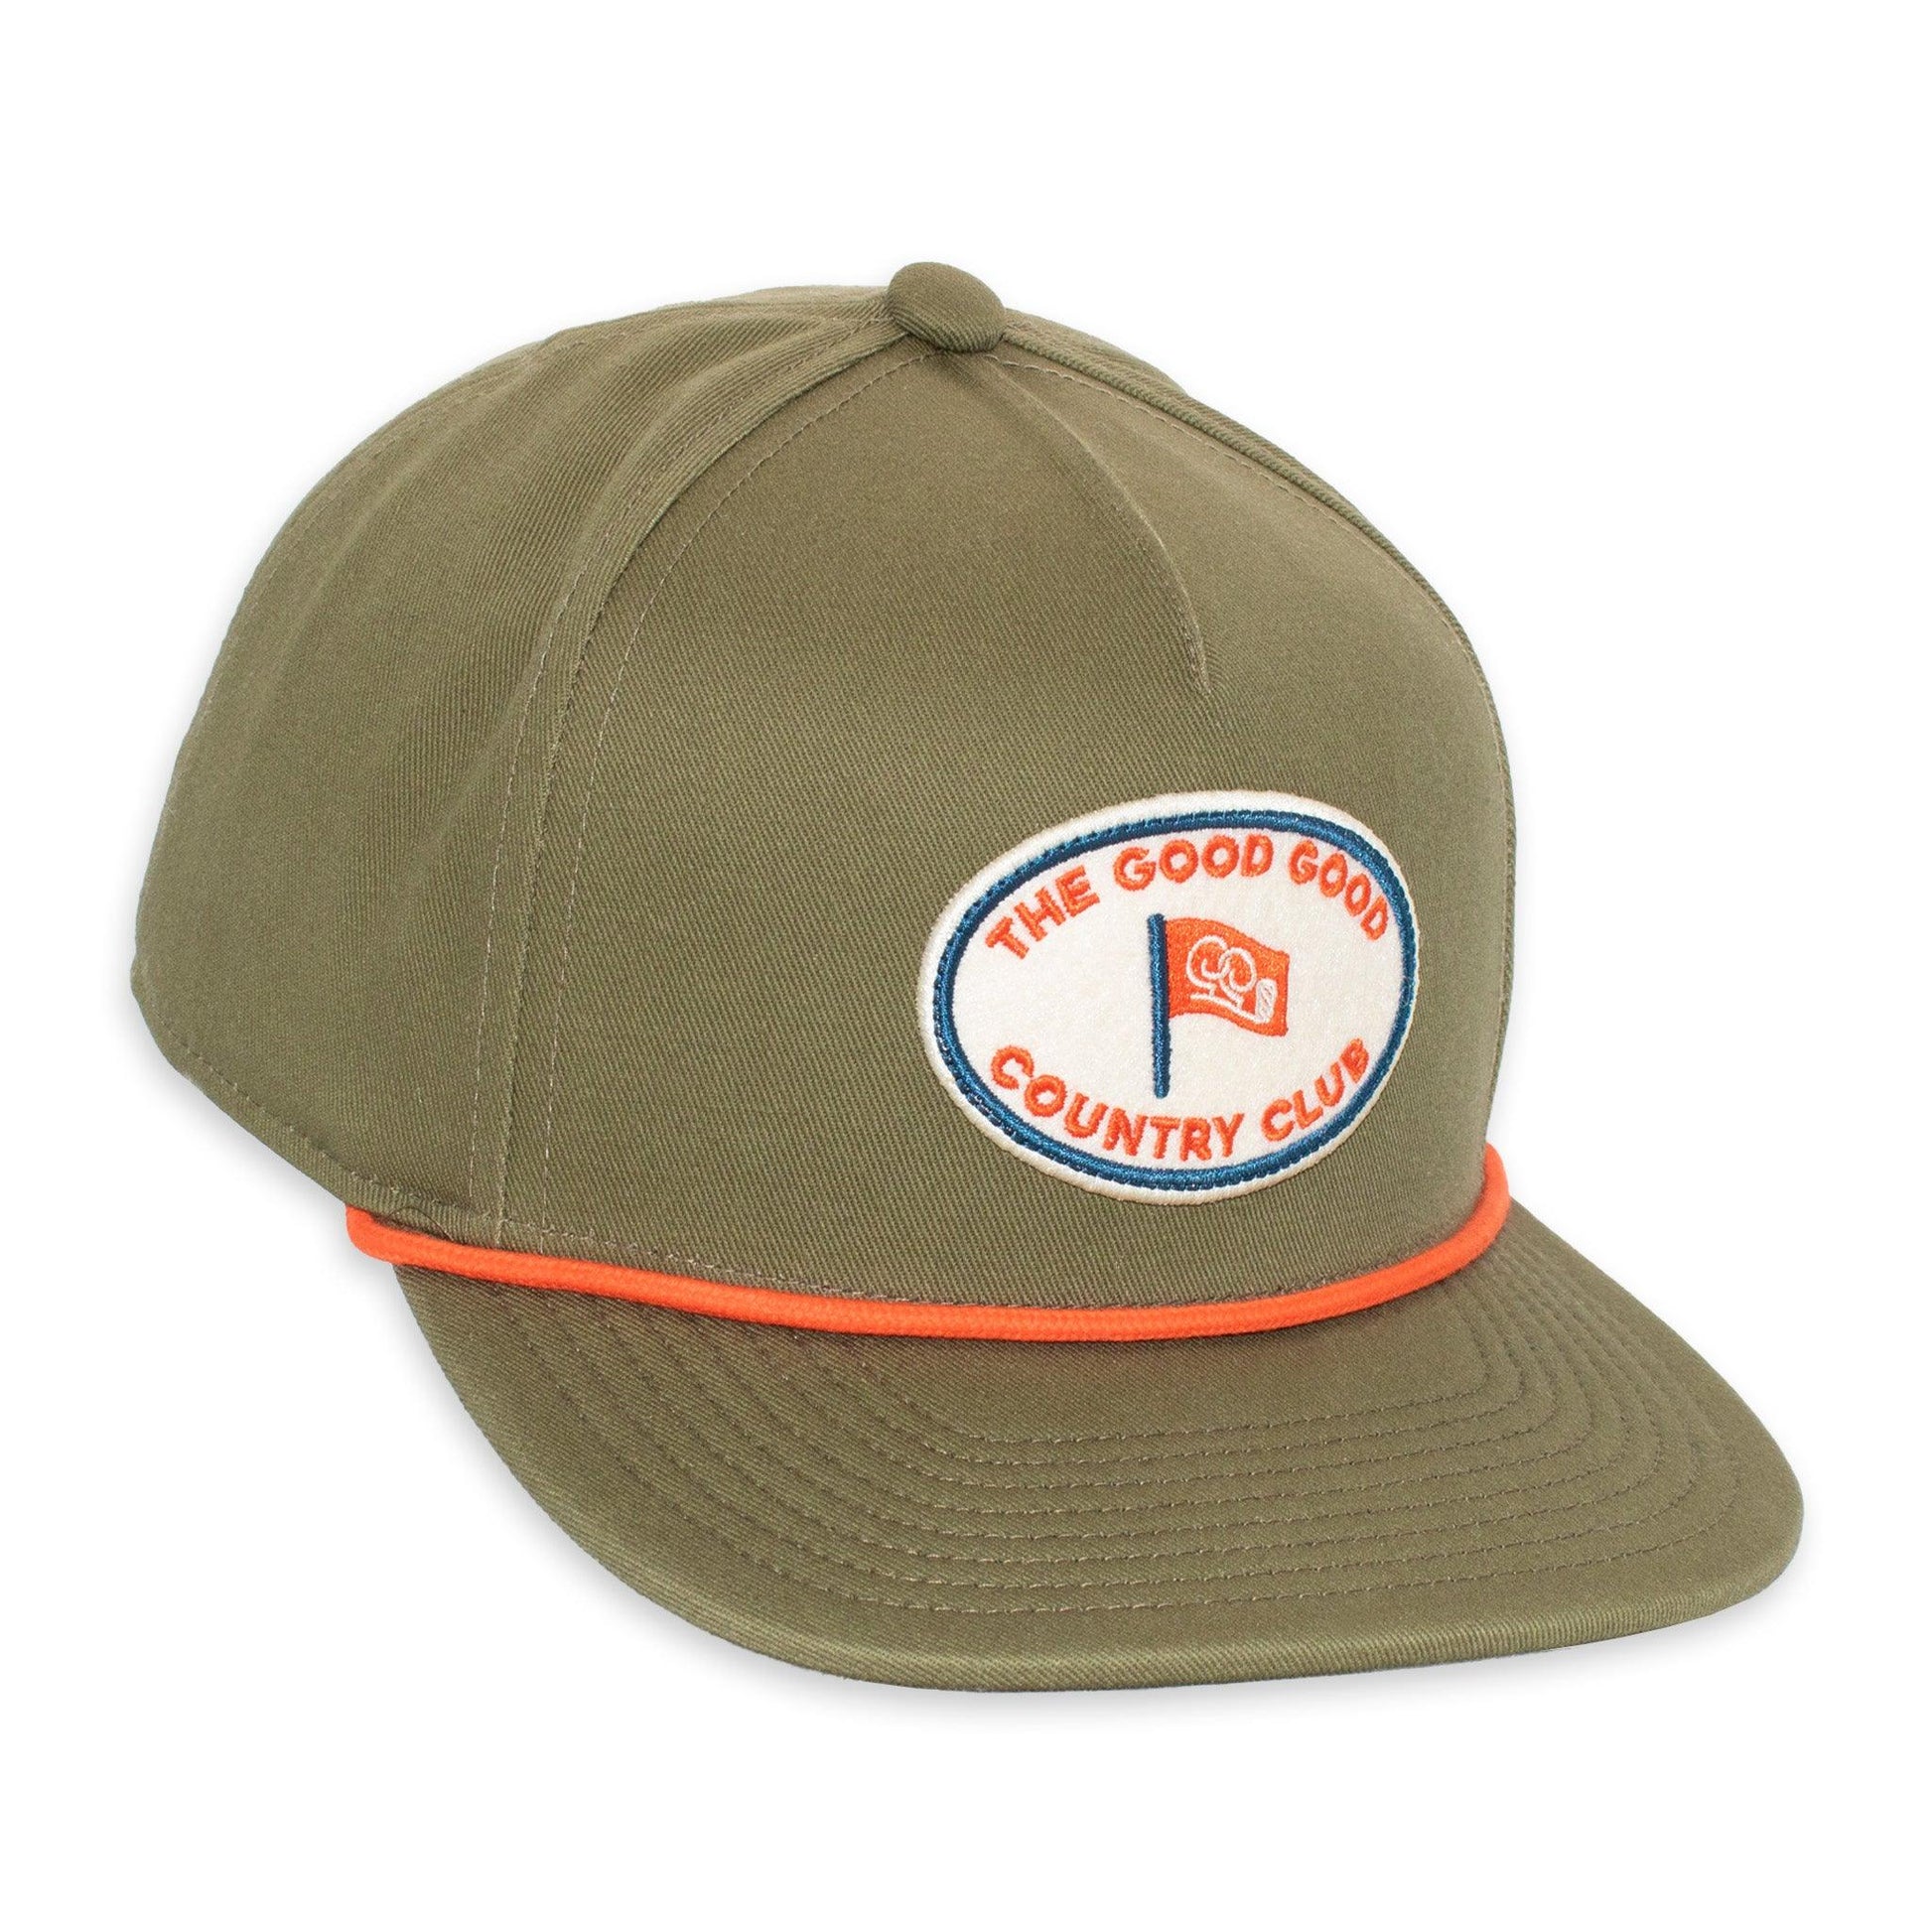 Country Club Rope Hat - Exclusive Rope Hat From Good Good